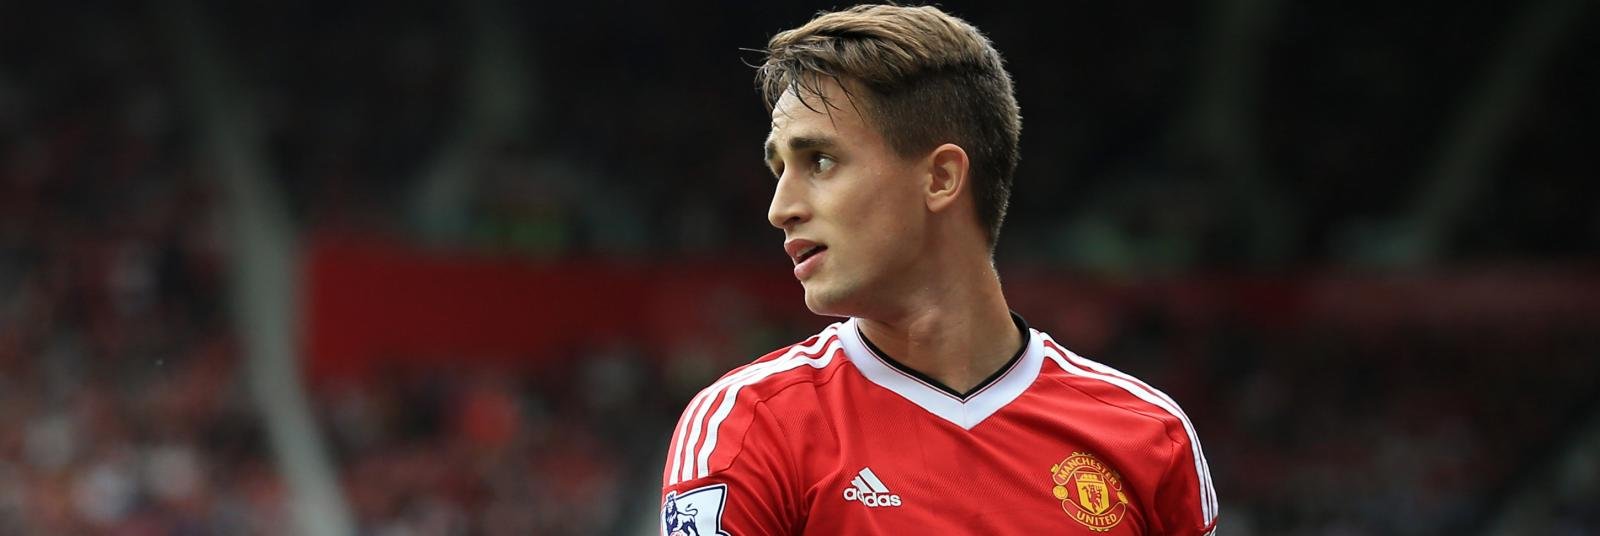 Manchester United set to loan 21-year-old forward to Premier League rival